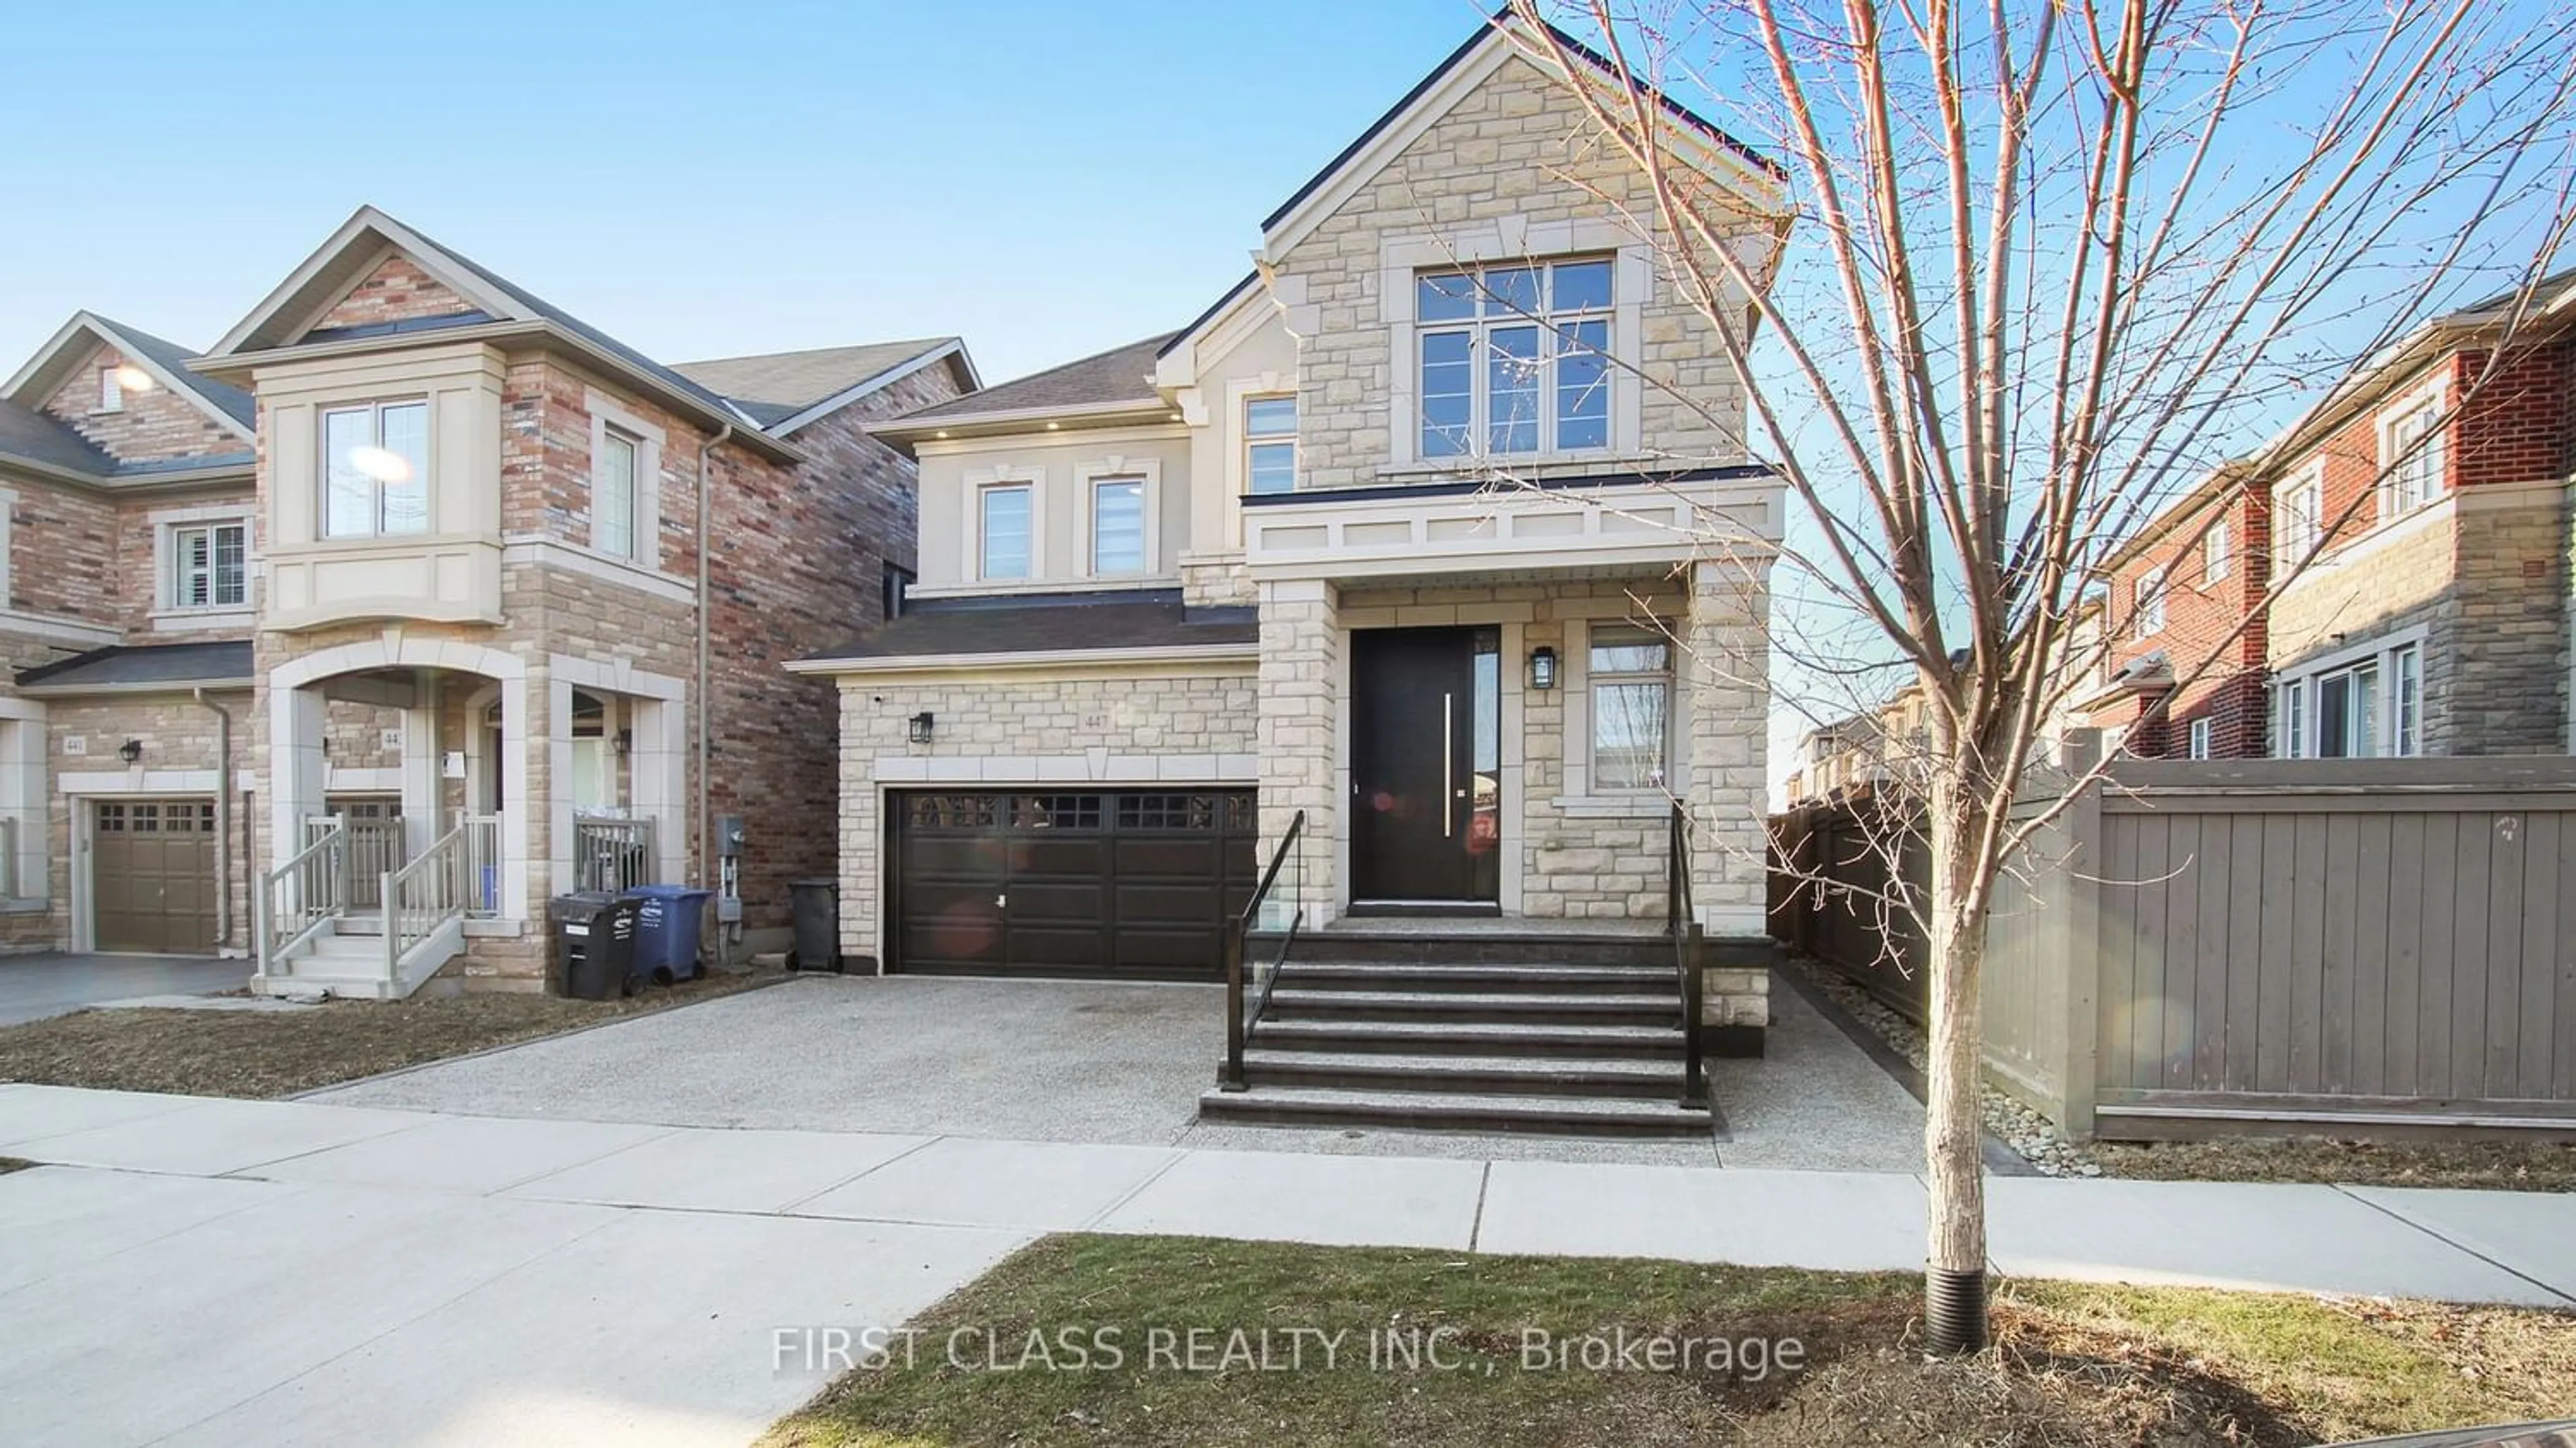 Home with brick exterior material for 447 George Ryan Ave, Oakville Ontario L6H 0S3